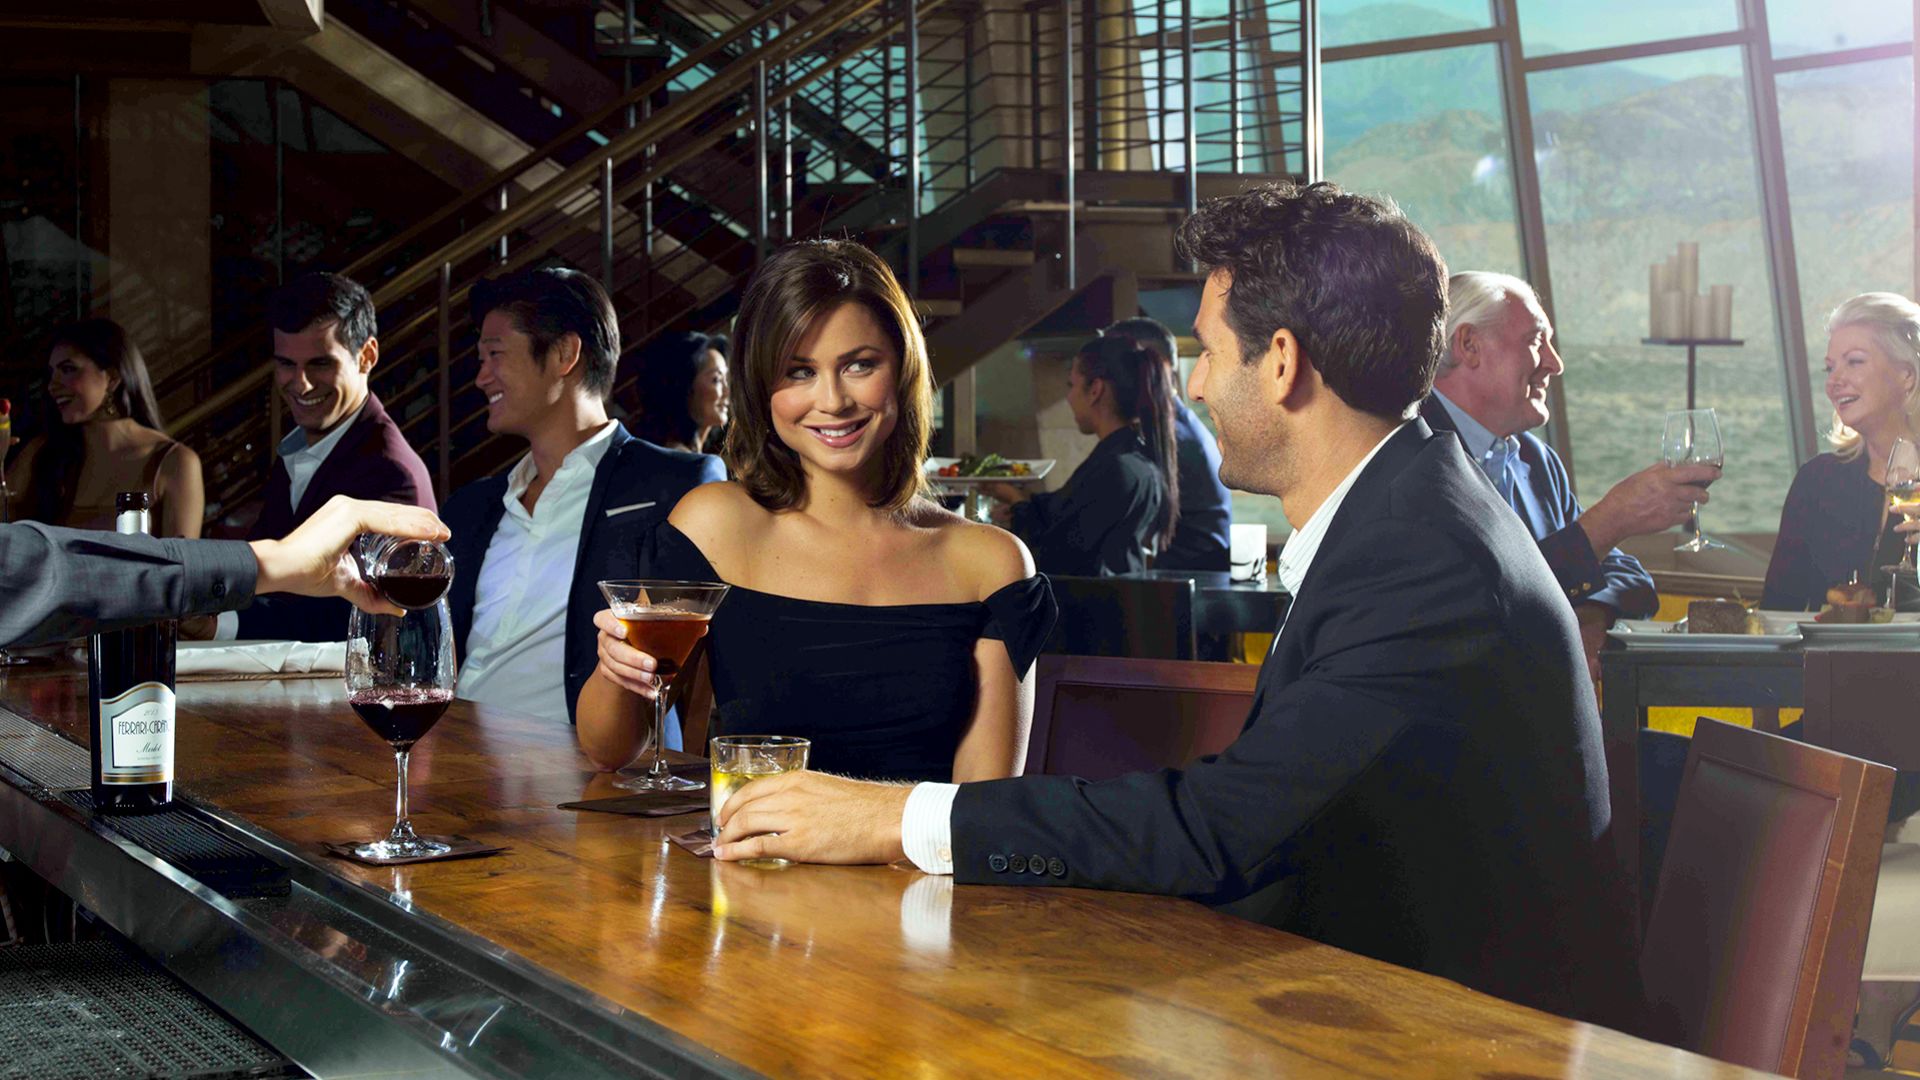 A Man And Woman Sitting At A Bar With Drinks